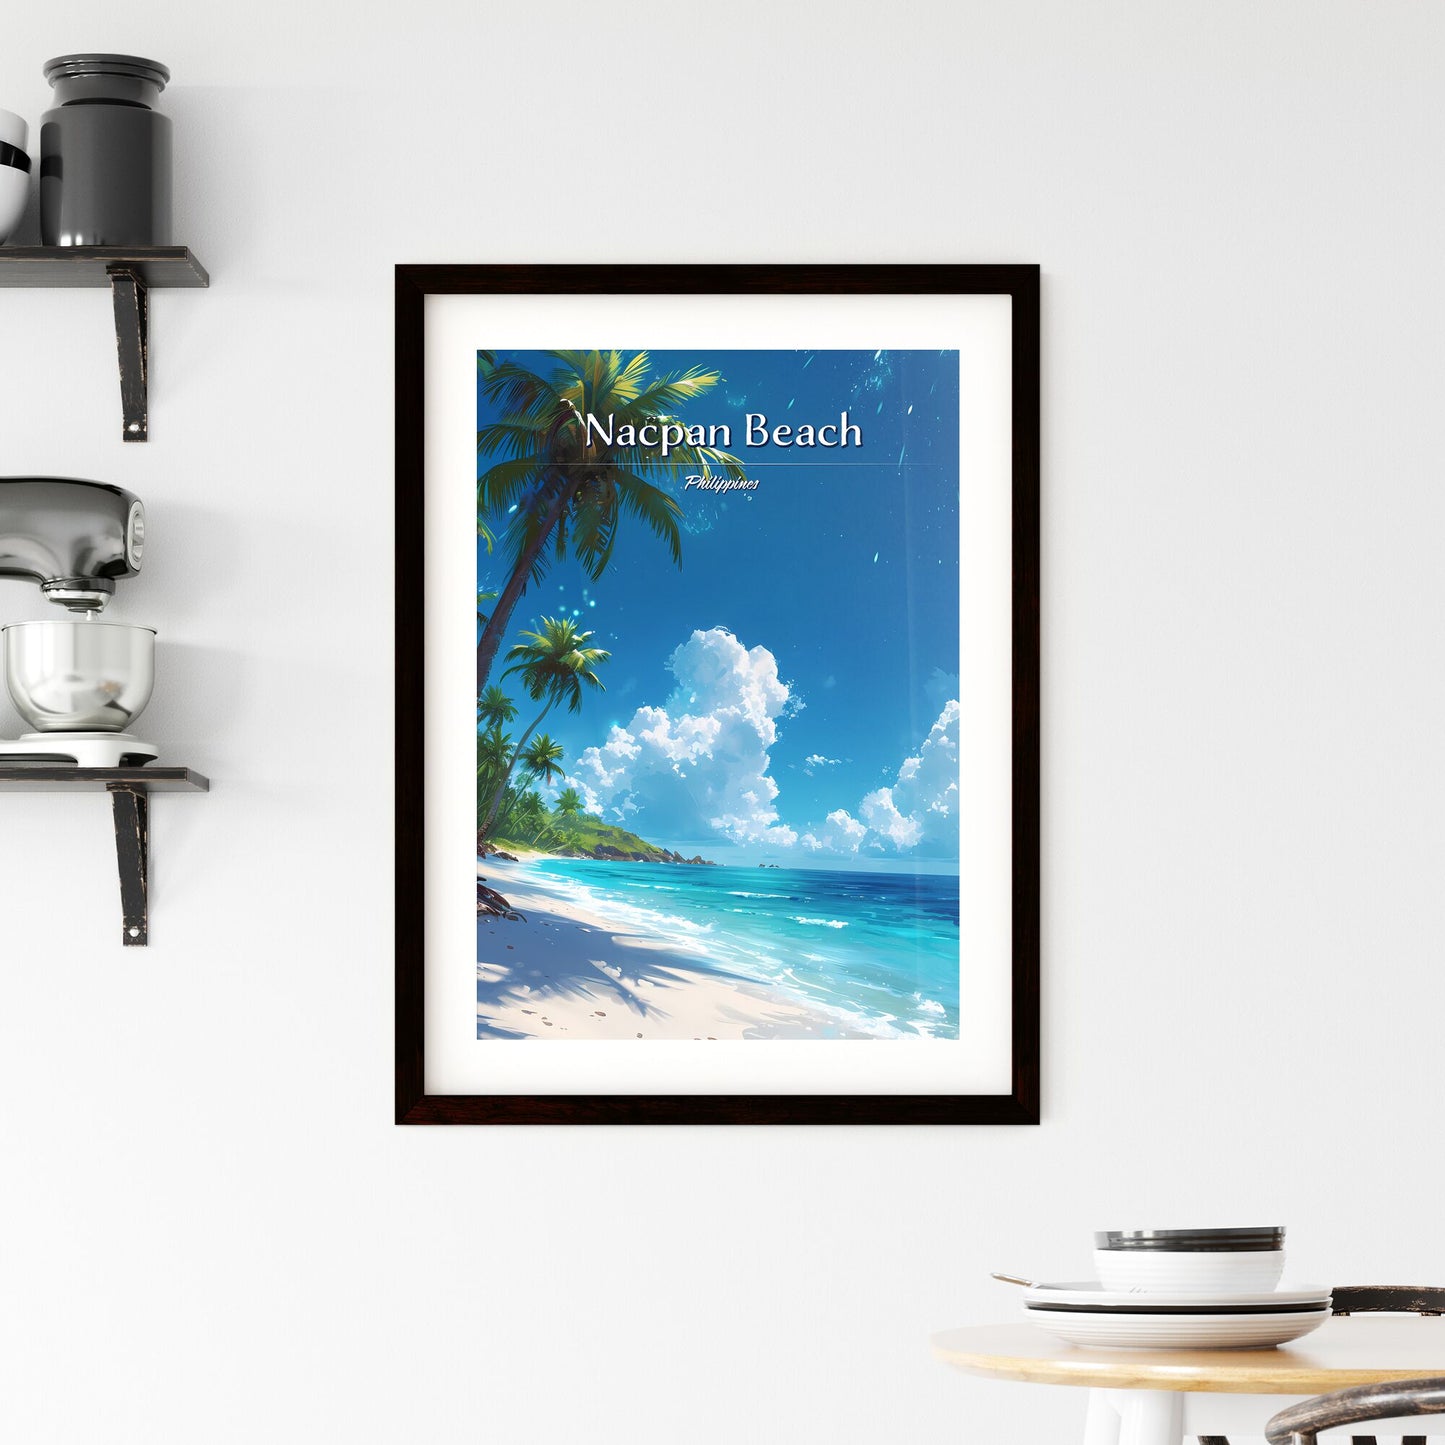 Nacpan Beach, Philippines - Art print of a painting of a vineyard Default Title